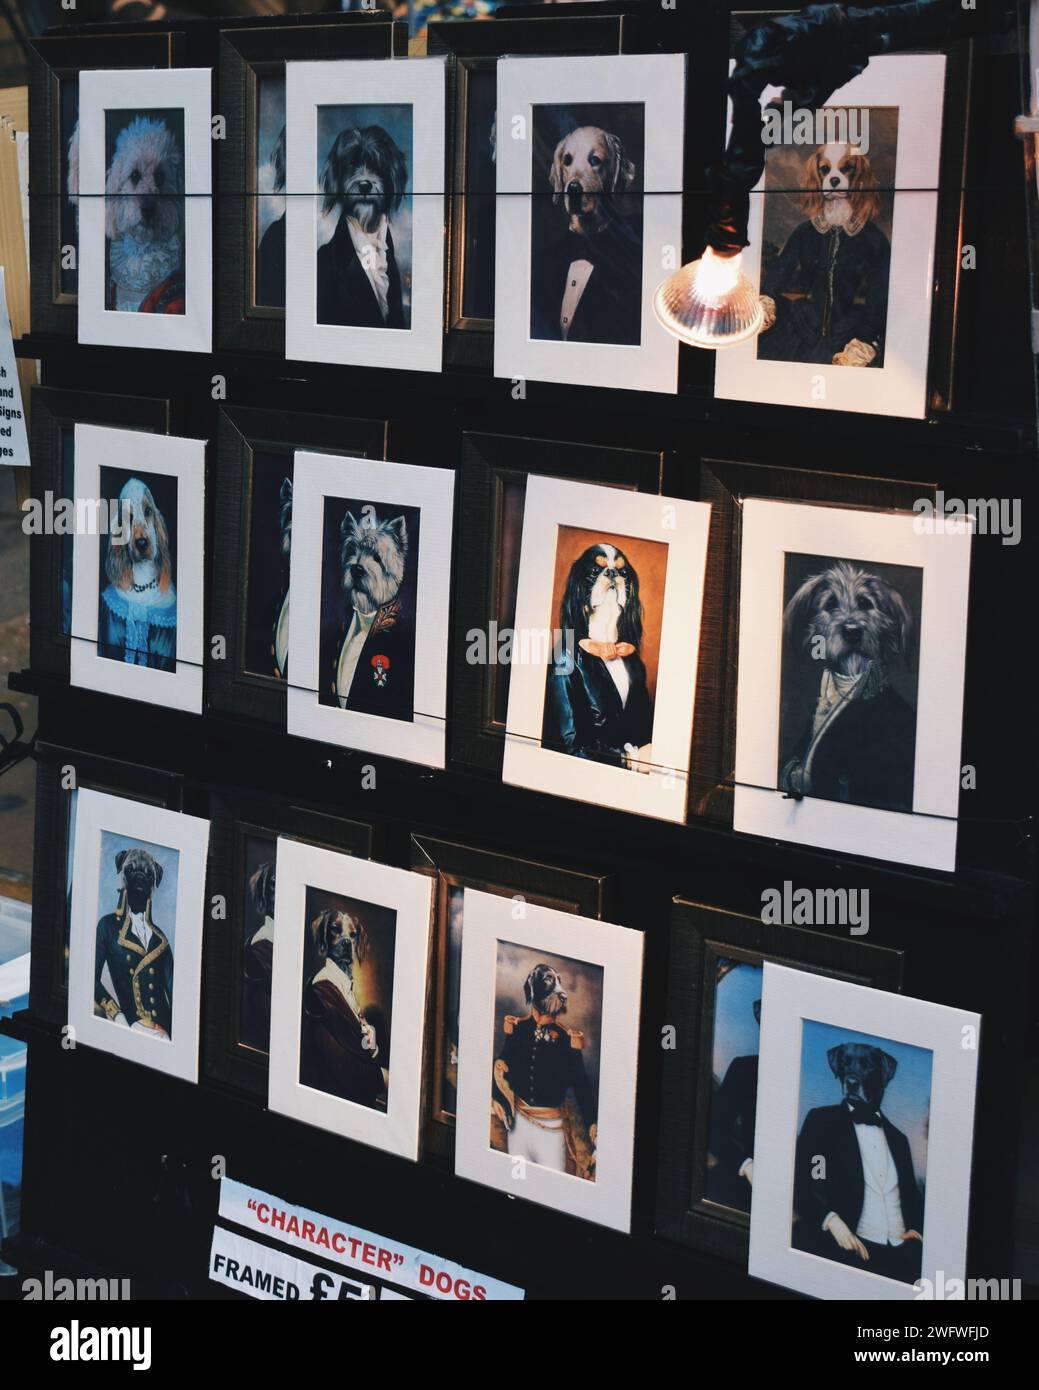 dog caricatures at a street art stall in London, England, on October 16, 2017 Stock Photo